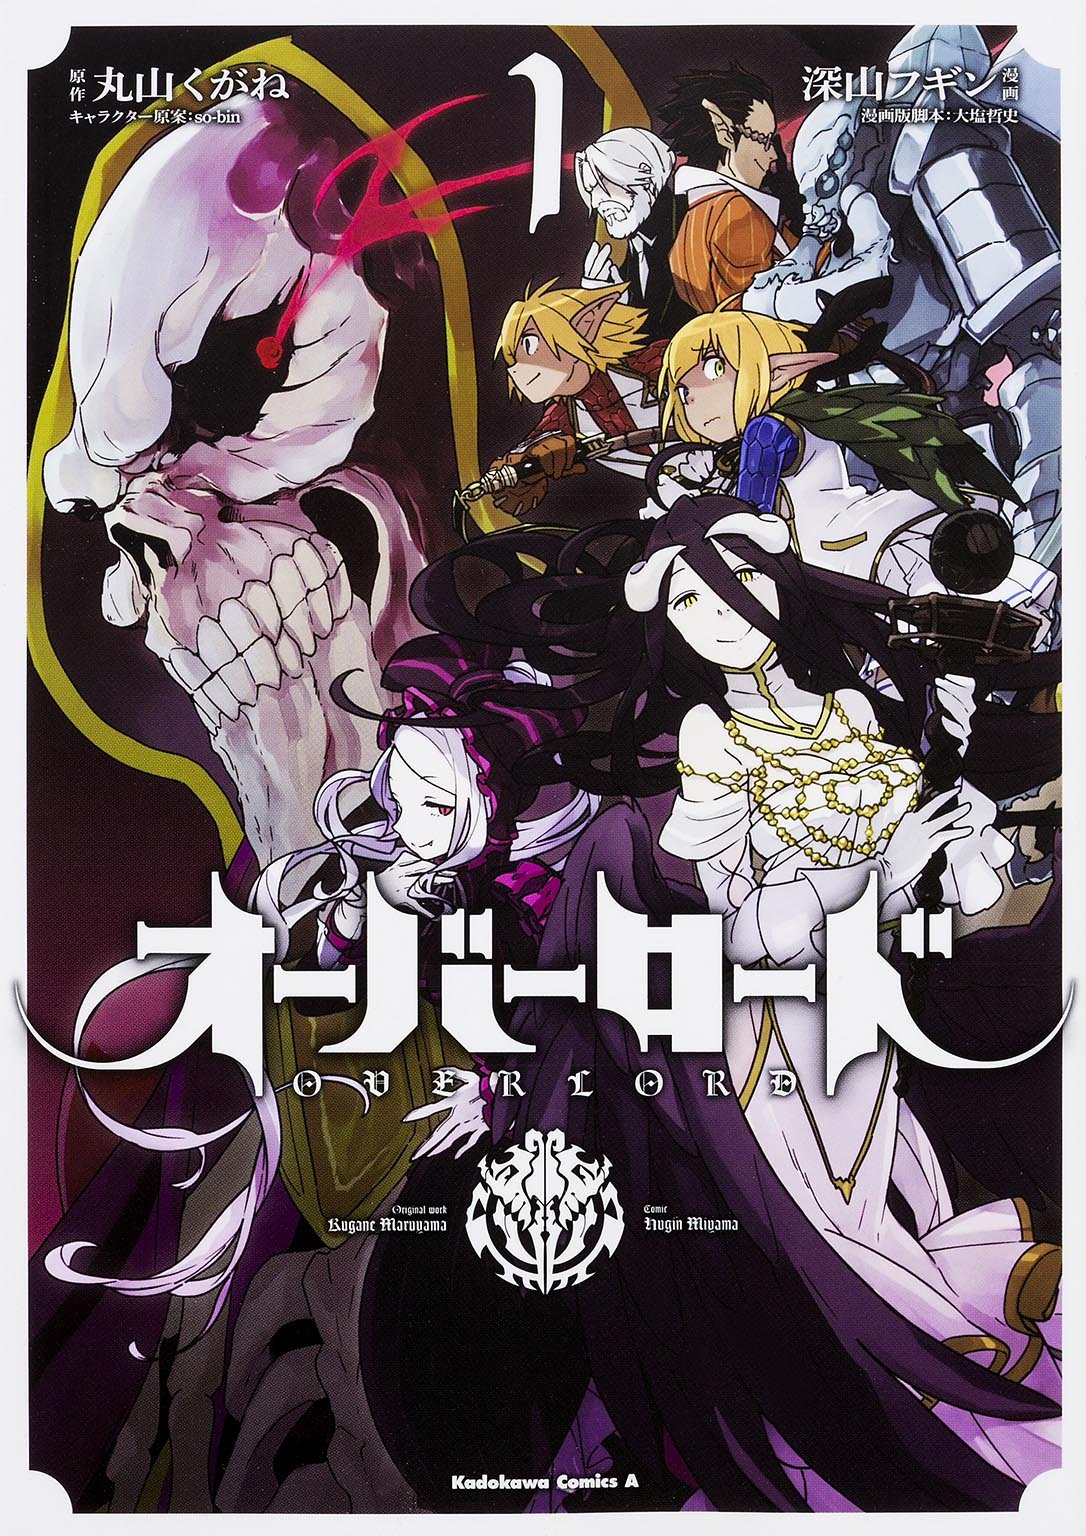 Overlord Anime Season 4 Episodes 1-13 Dual Audio English/Japanese with Eng  Subs